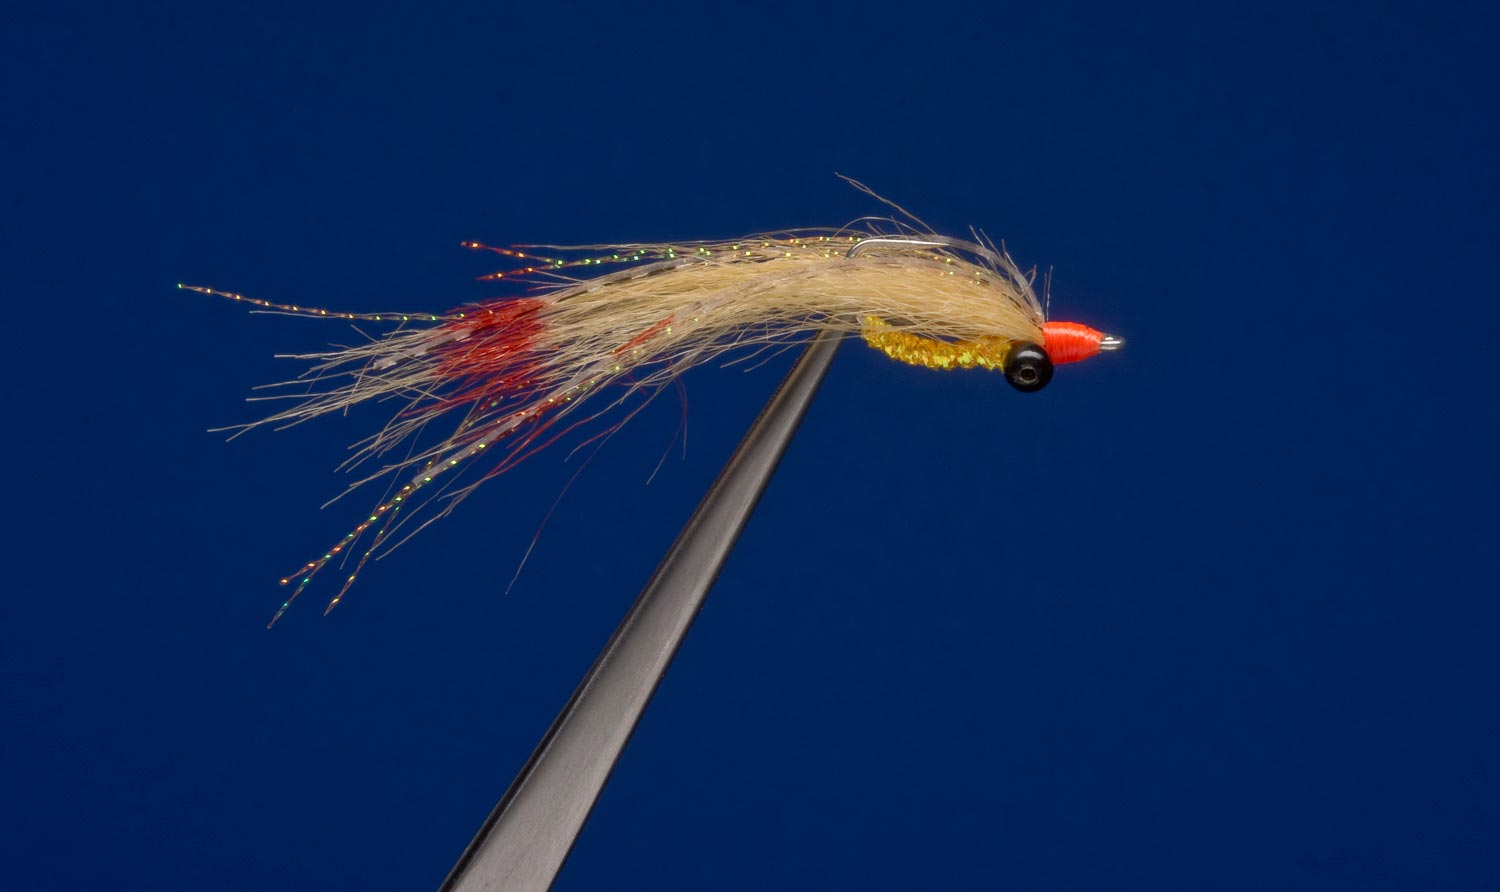 Chard's Snapping Shrimp - Fly Fishing, Gink and Gasoline